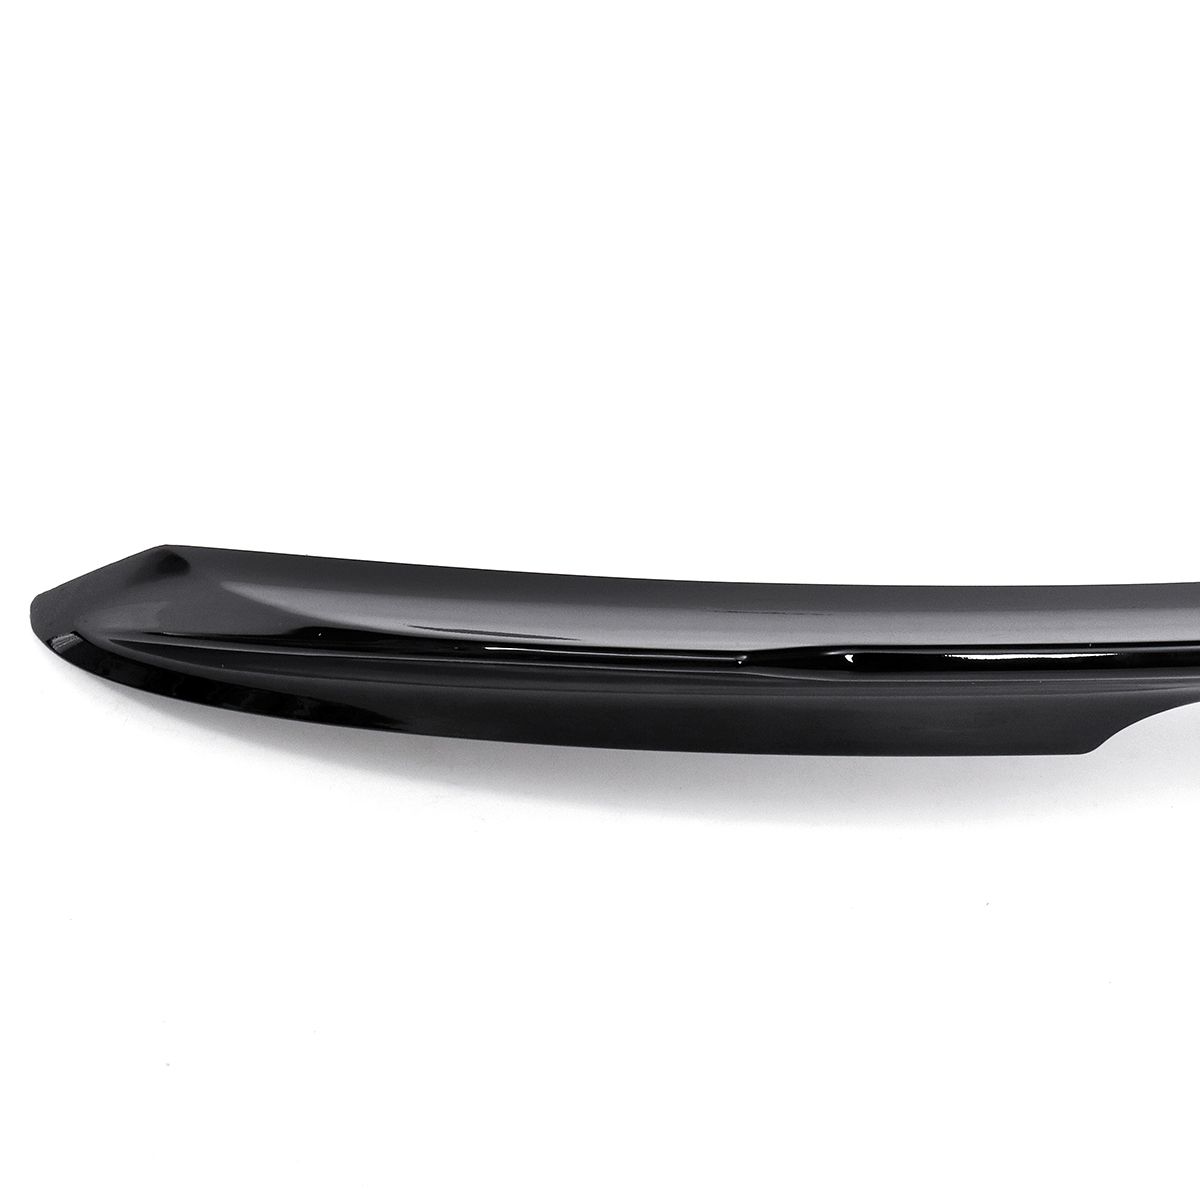 Car-Sport-Rear-Trunk-LID-Spoiler-Wing-For-TOYOTA-CAMRY-2018-2019-Painted-Gloss-BLACK-ABS-Plastic-1534207